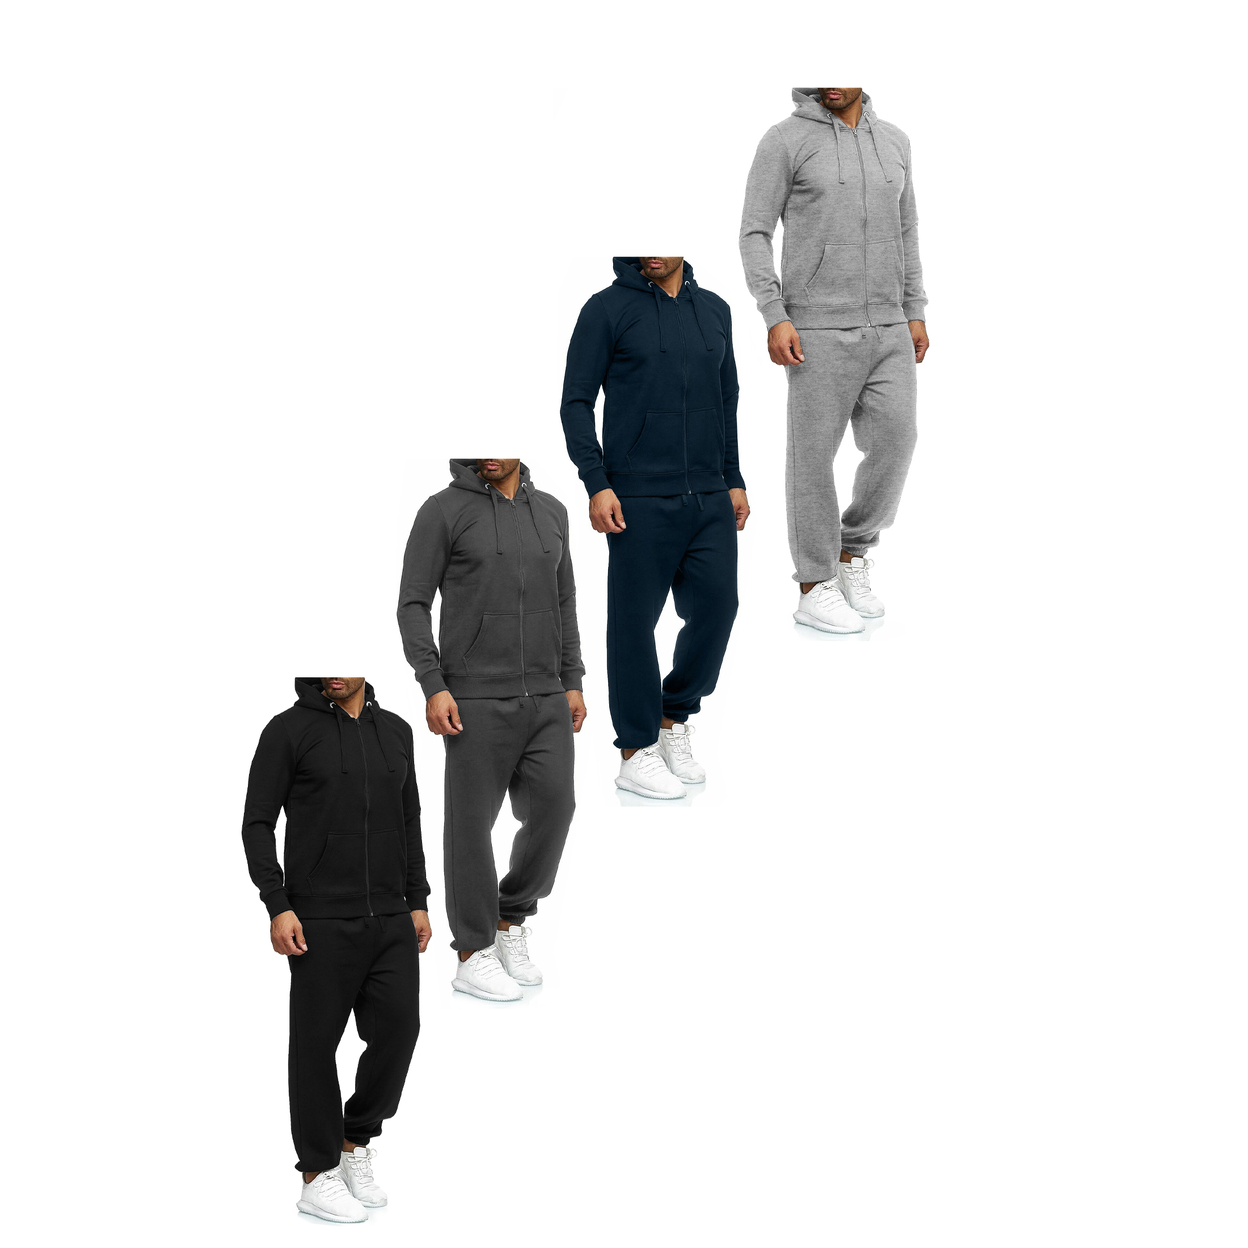 2-Pack: Men's Casual Big & Tall Athletic Active Winter Warm Fleece Lined Full Zip Tracksuit Jogger Set - Navy, 3xl